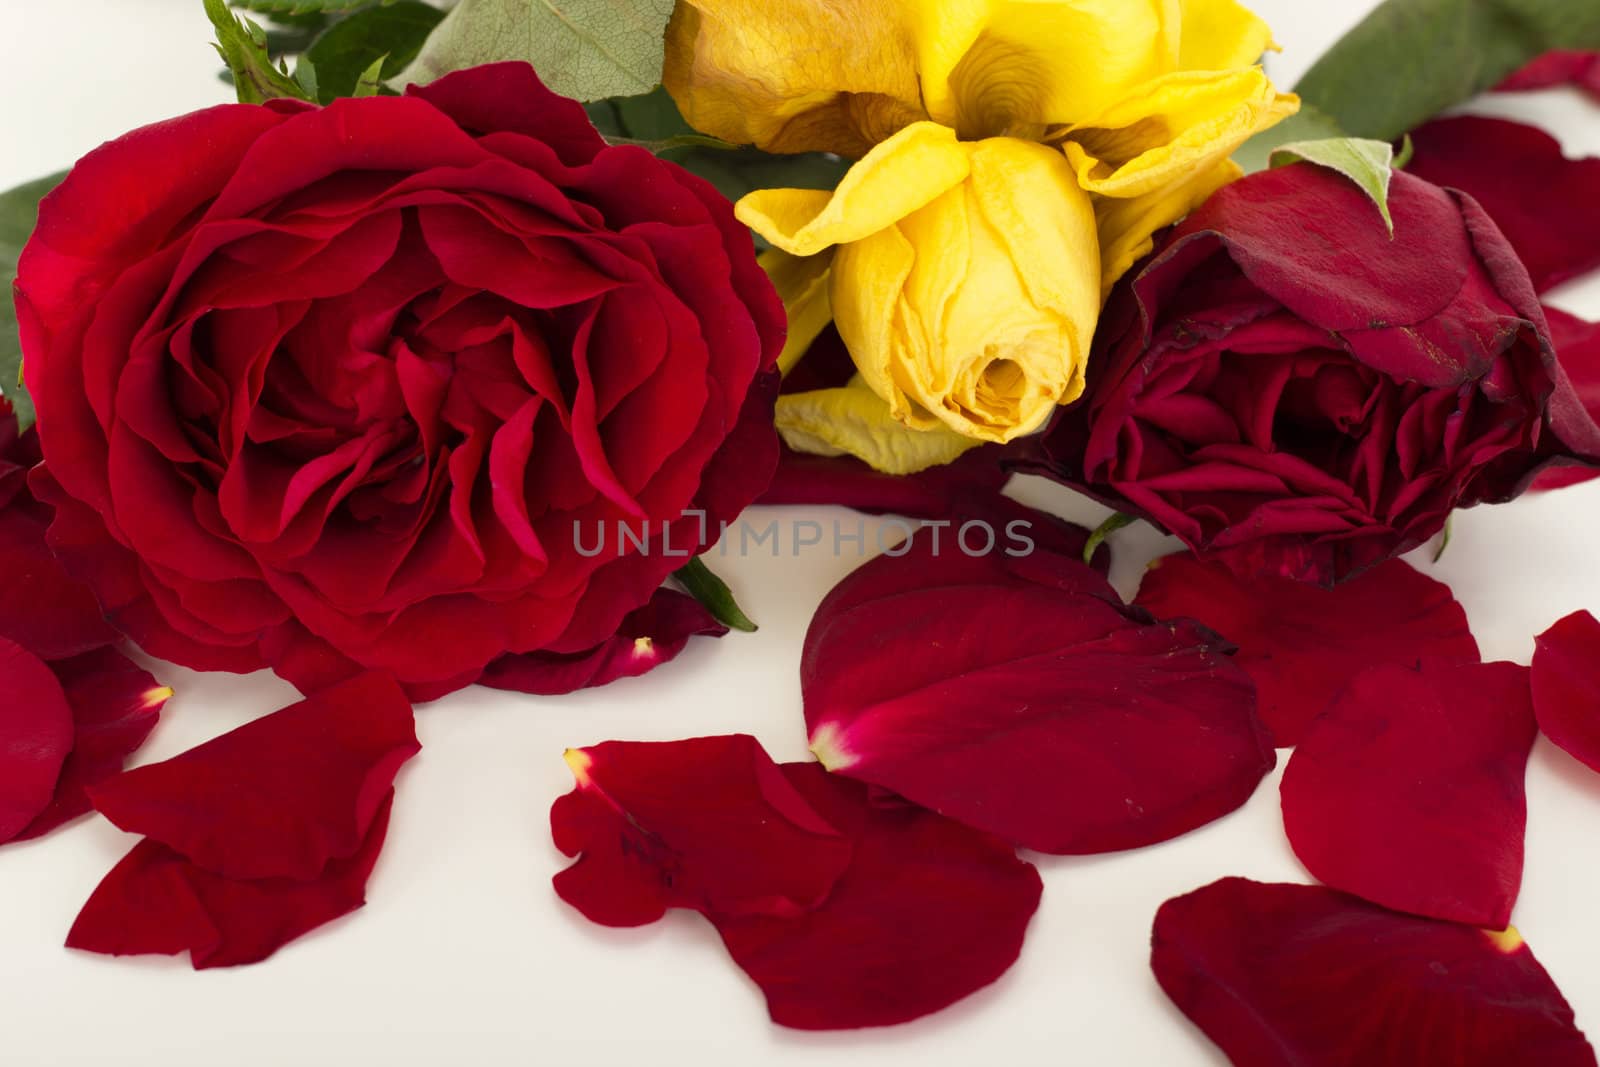 Roses with petals